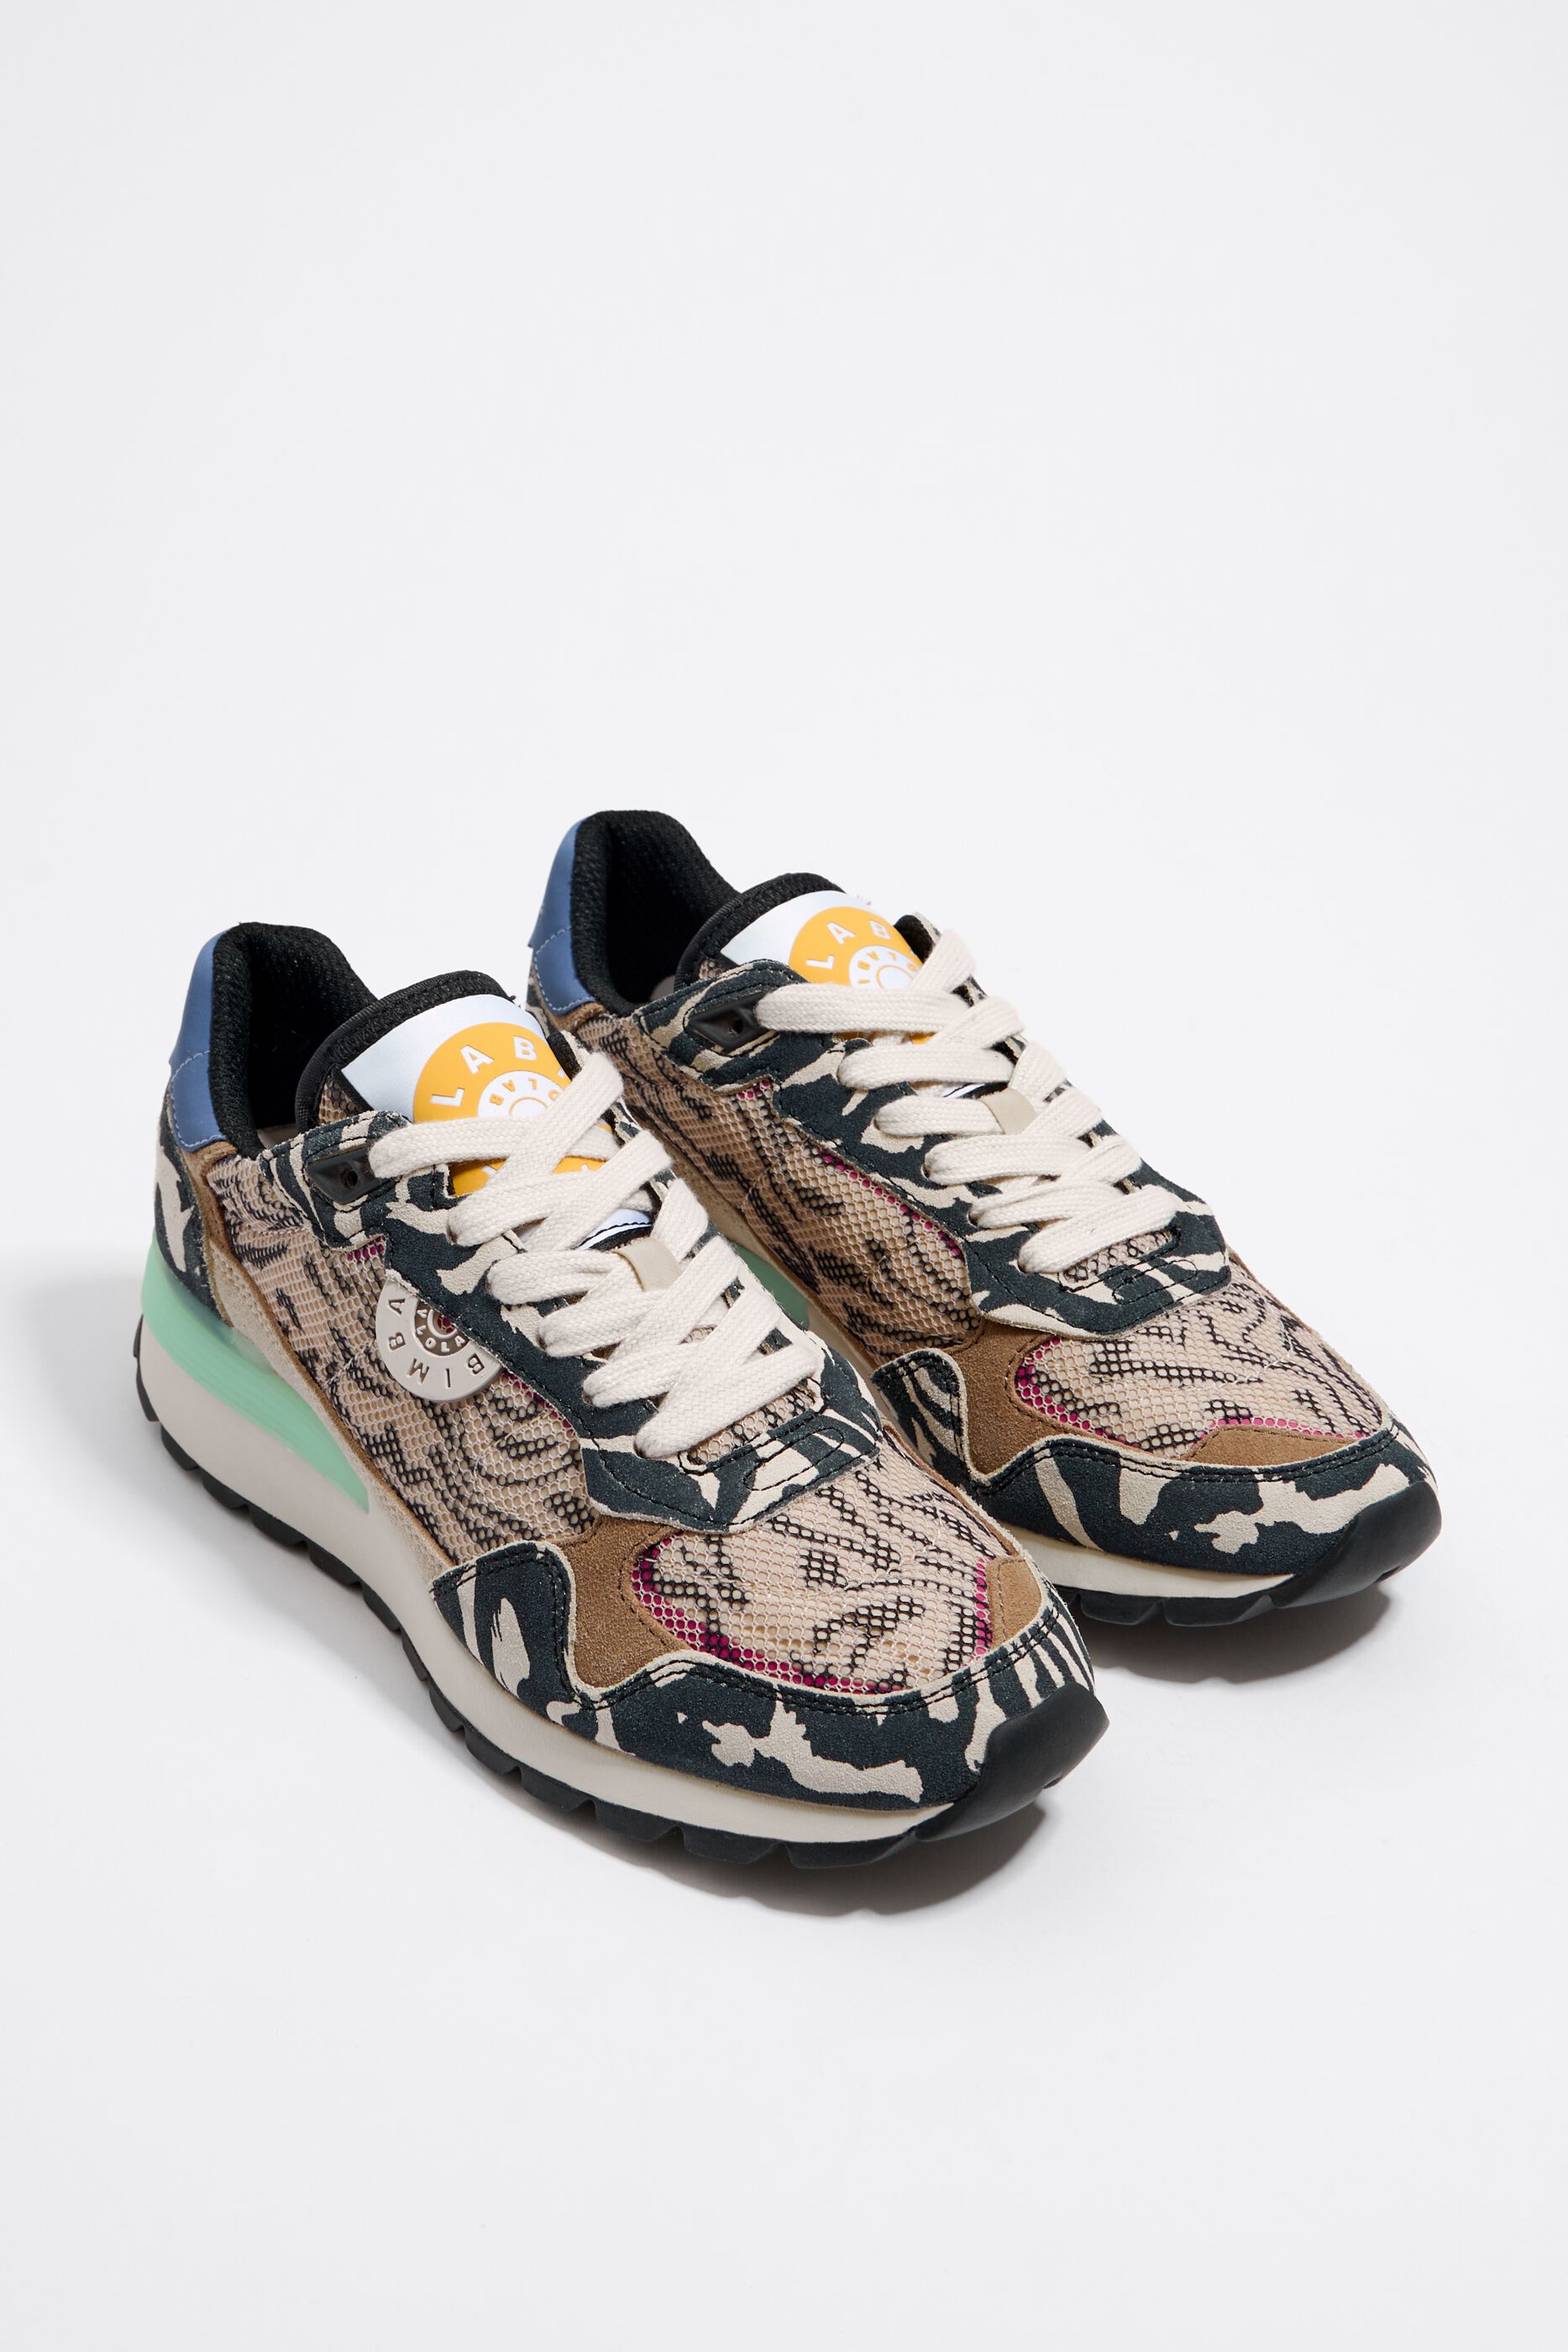 Dolce & Gabbana NS1 Sneakers With Tiger Print